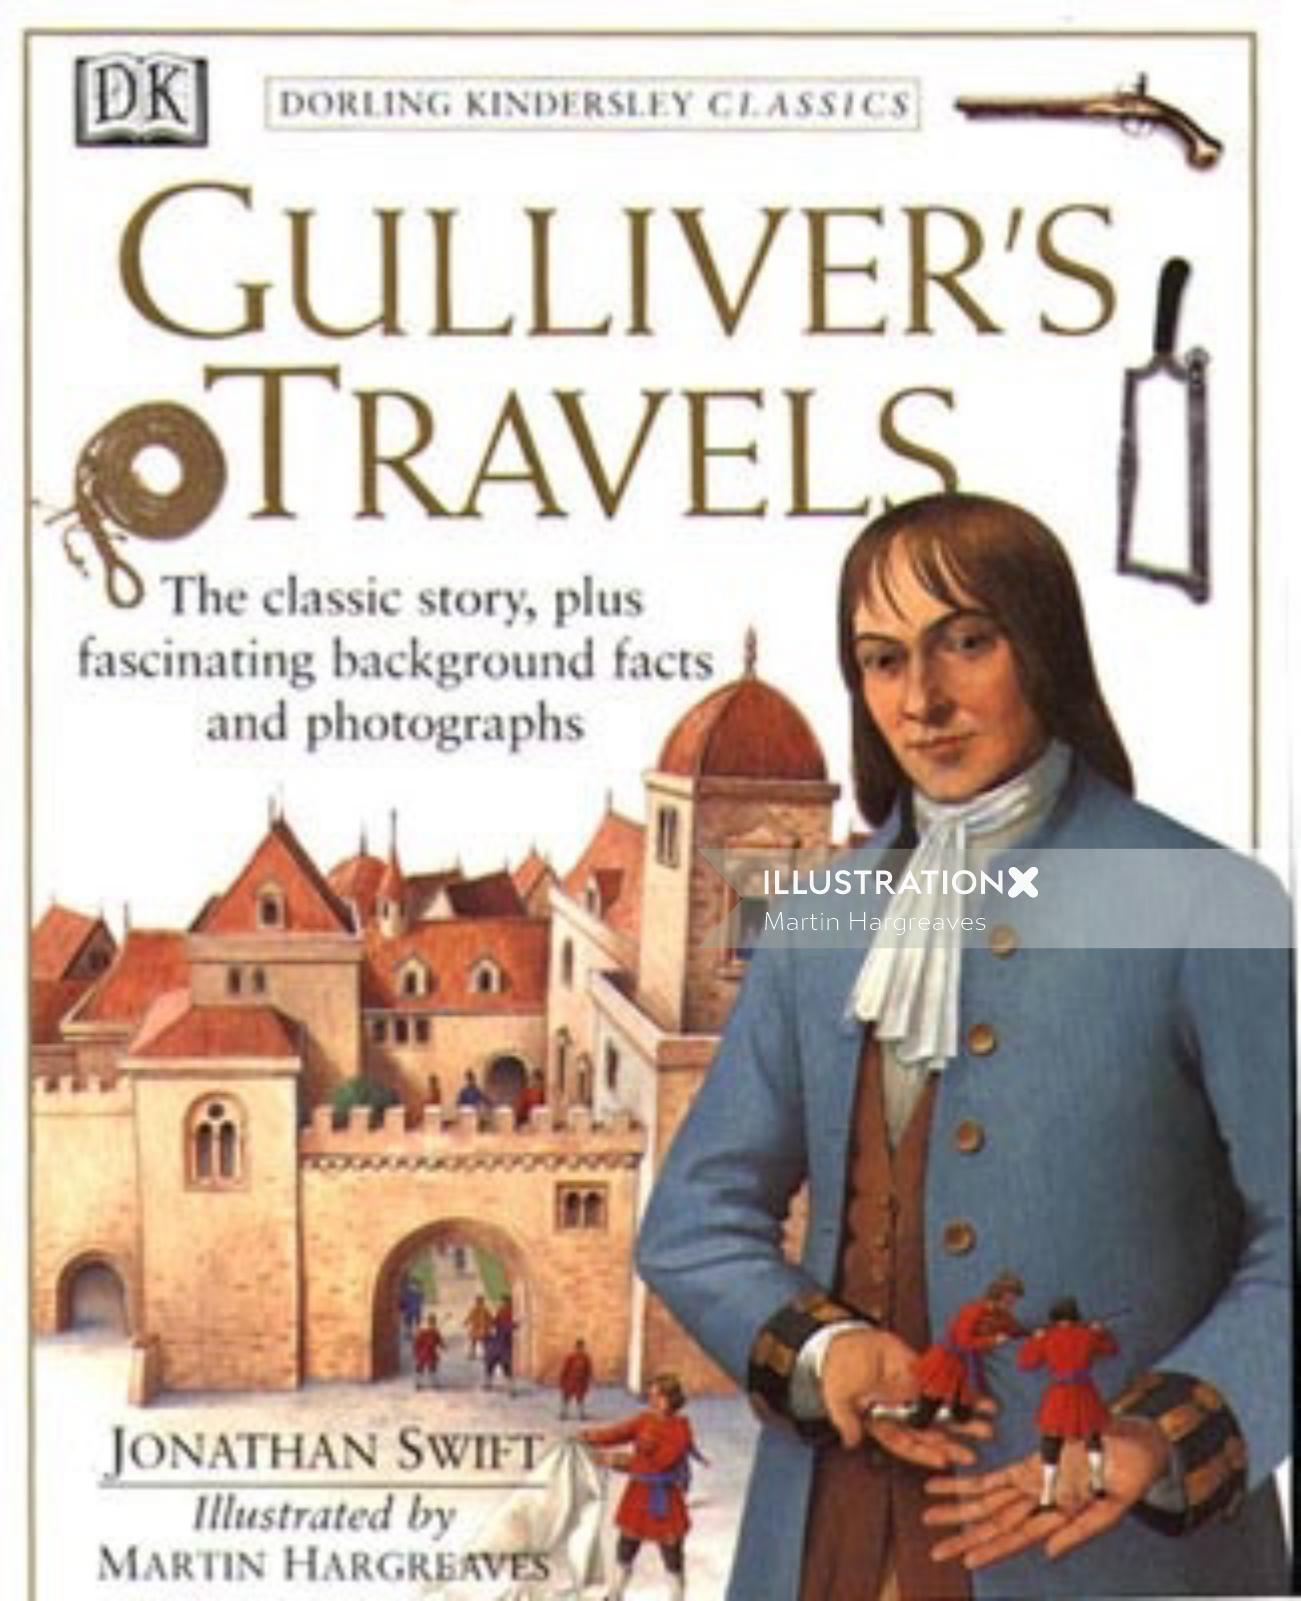 Gulliver's travels cover page illustration 